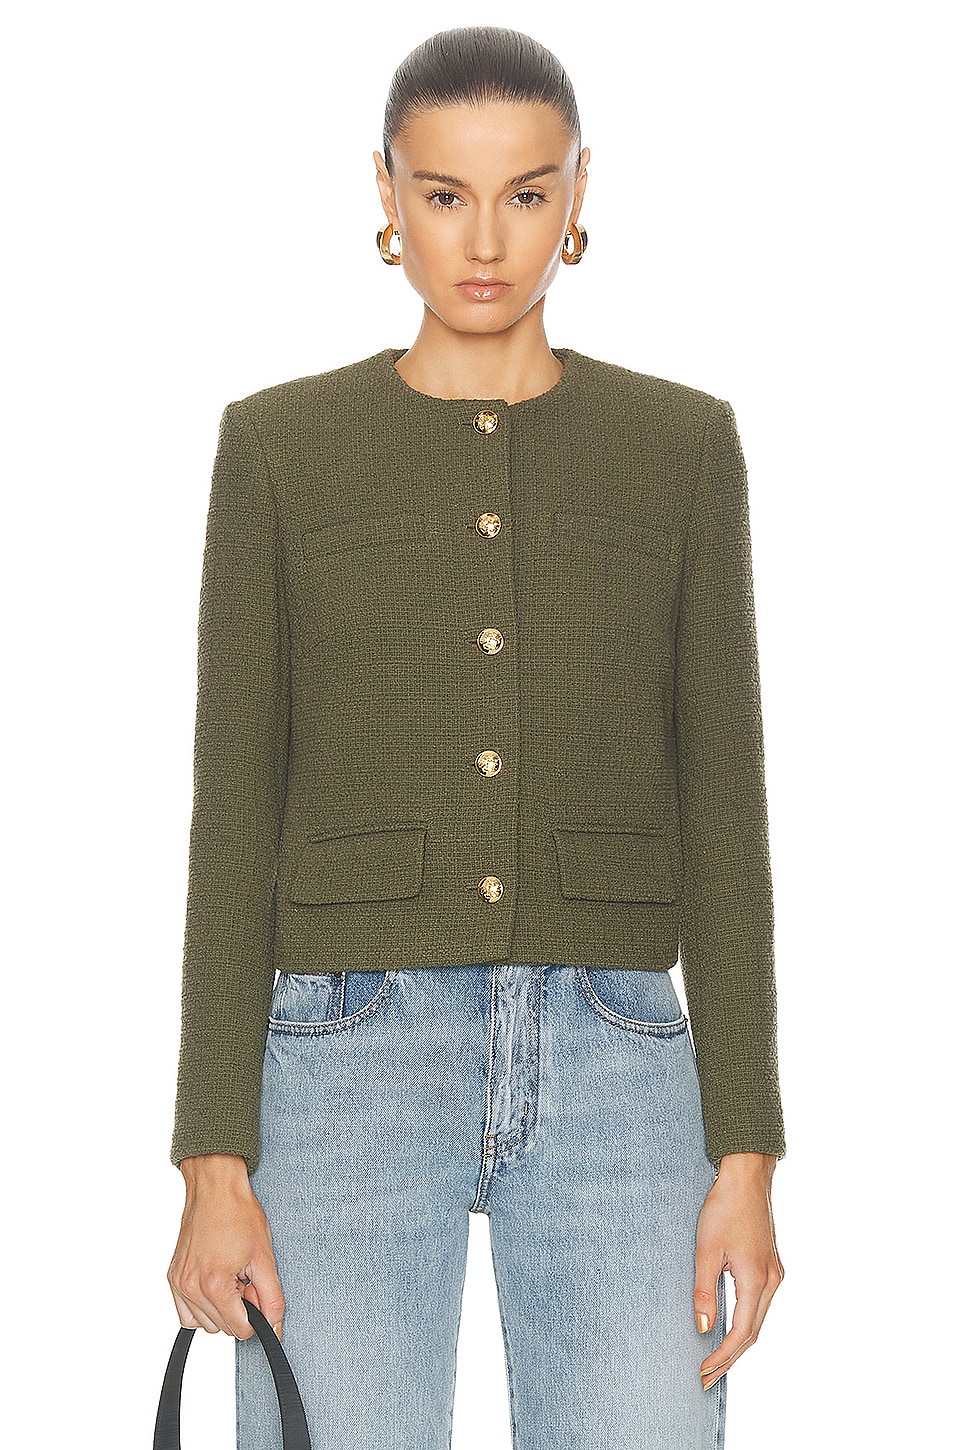 Image 1 of NILI LOTAN Paiges Jacket in Army Green